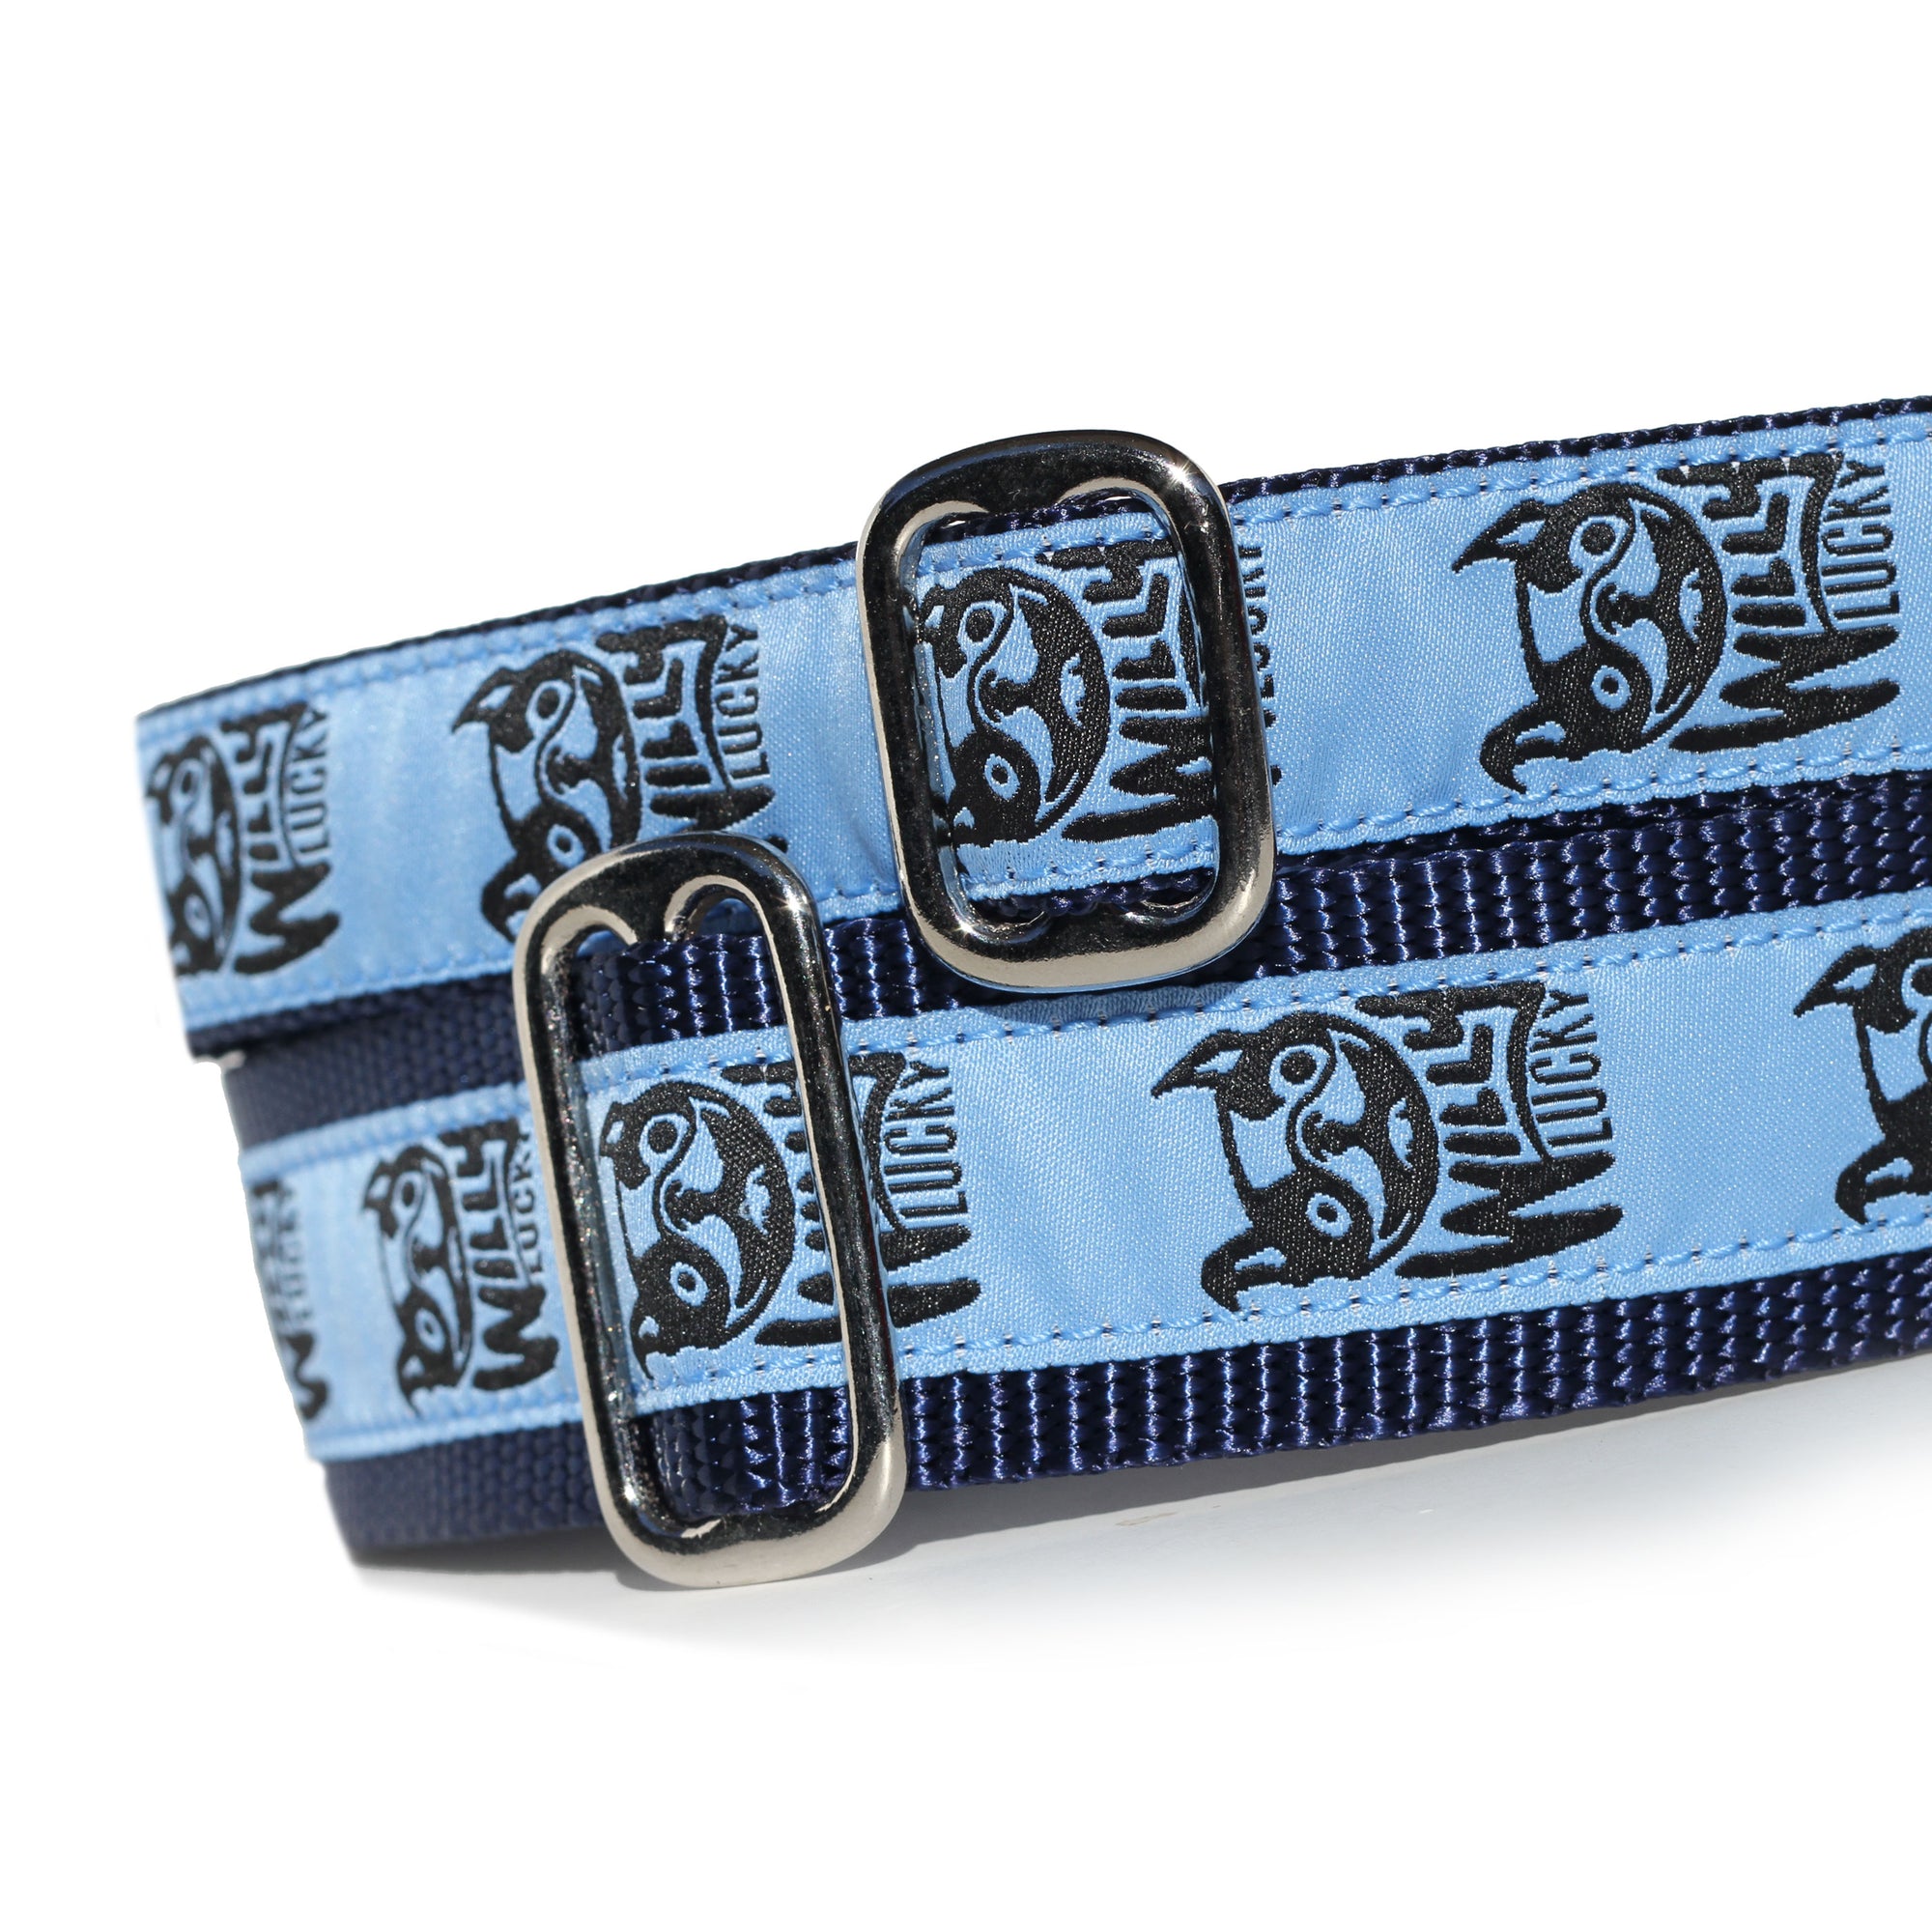 Willy Lucky Pet Rescue Collars & Gear